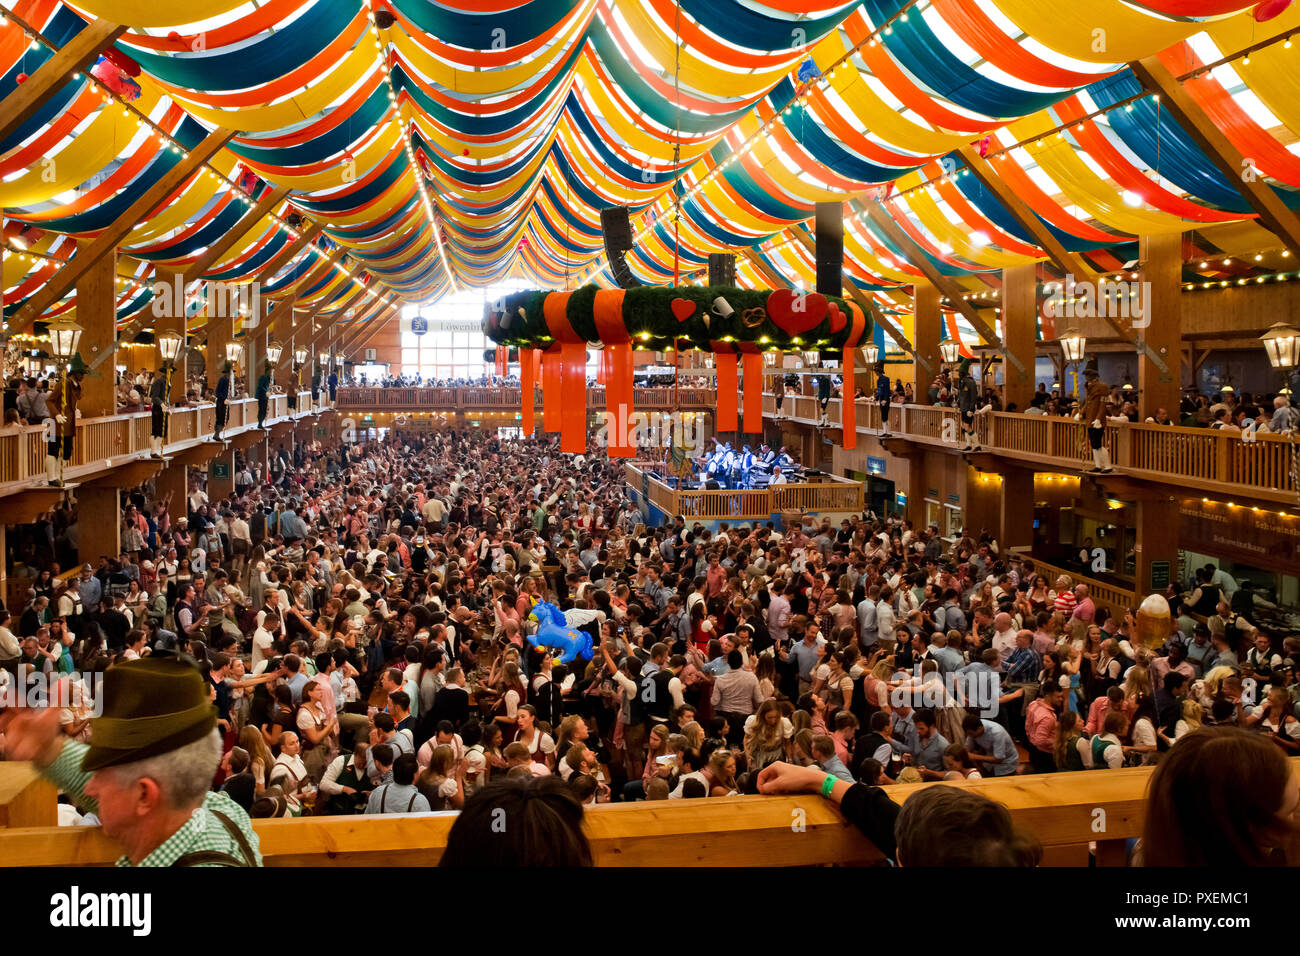 Crowd of people in Lowenbrau tent in Munich city, Germany Stock Photo